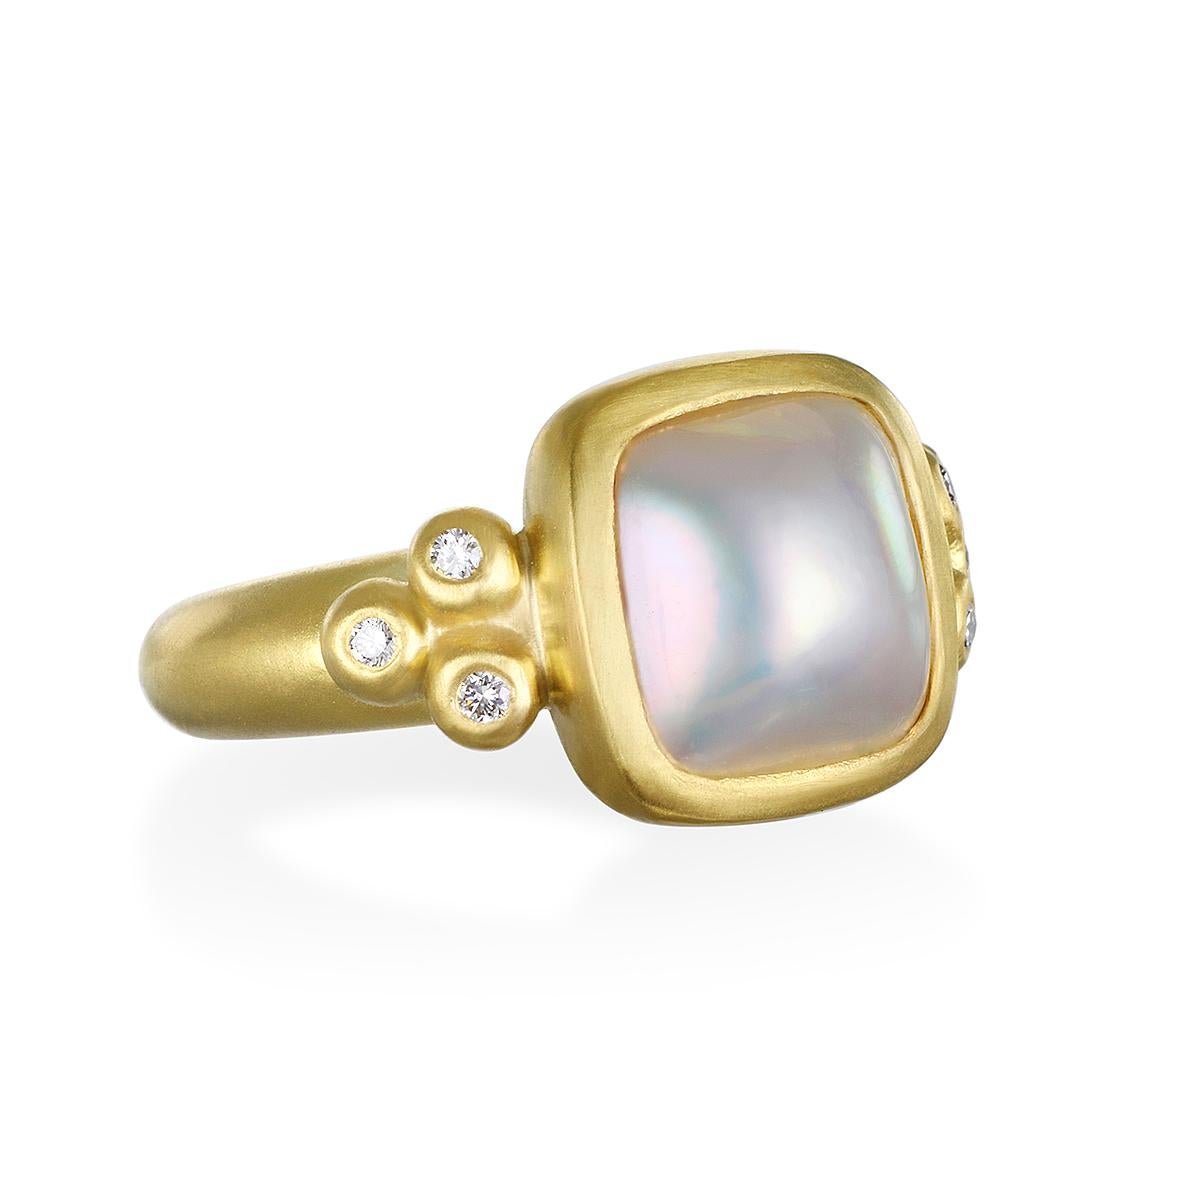 Contemporary Faye Kim 18 Karat Gold Mabe Pearl and Diamond Ring For Sale